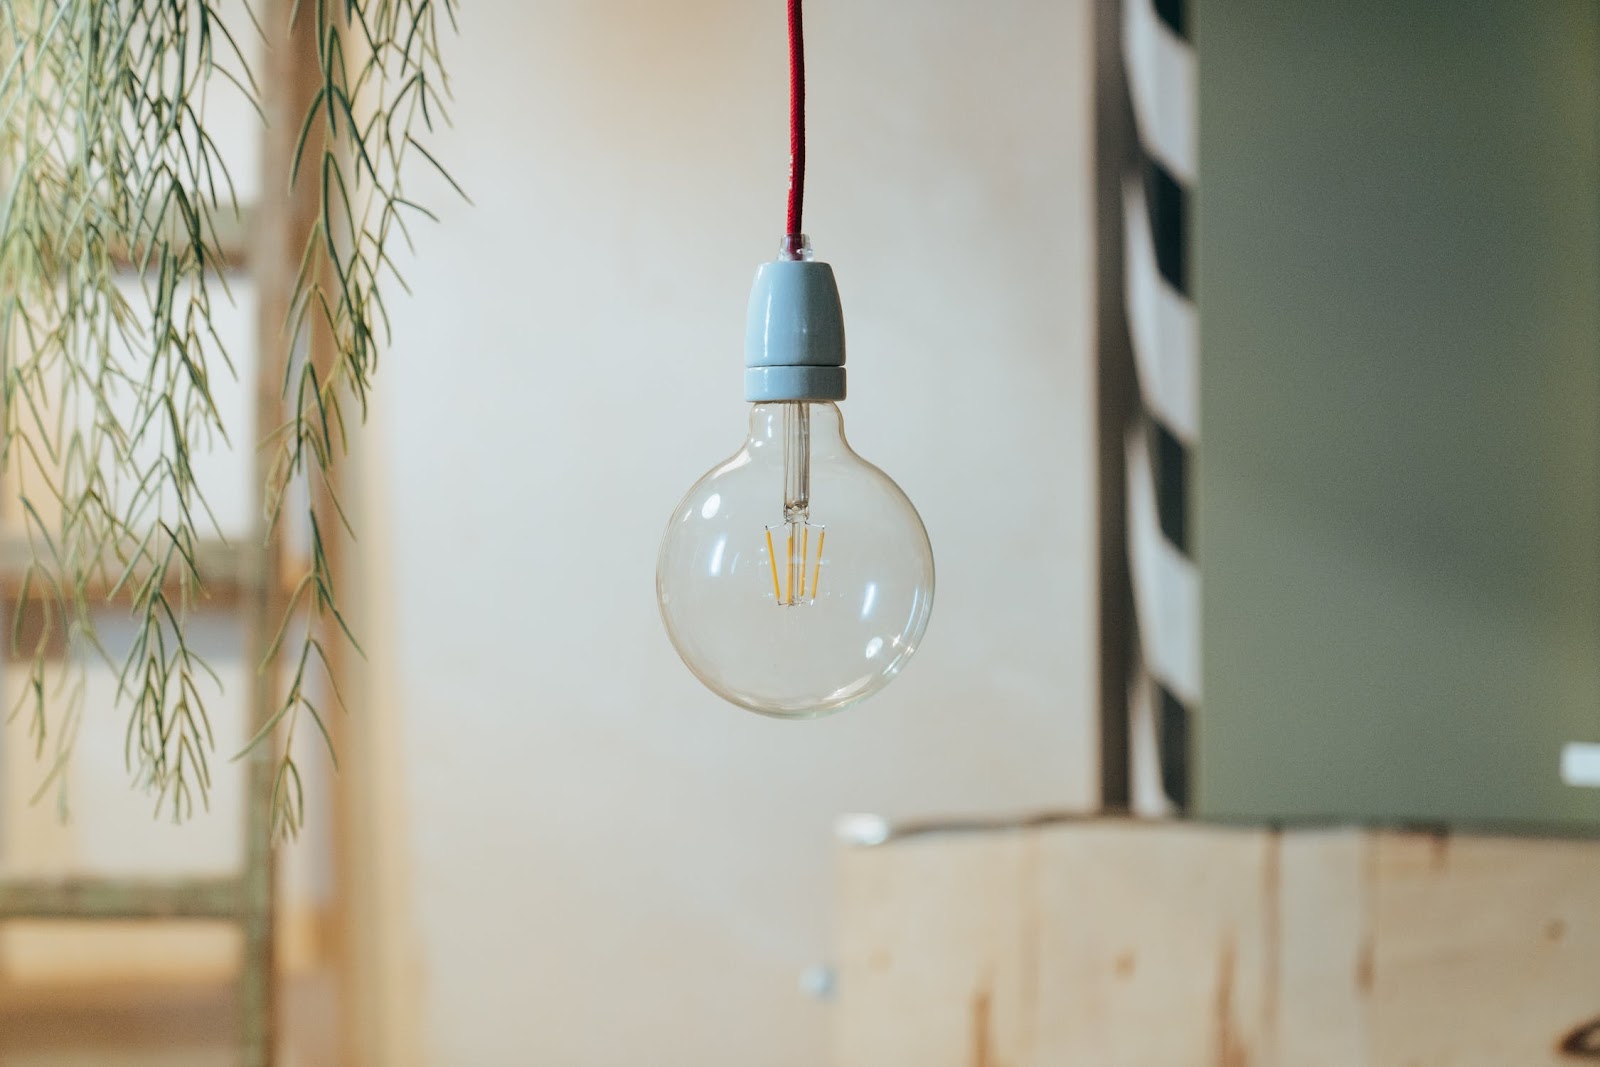 An unlit light bulb against a blurred background